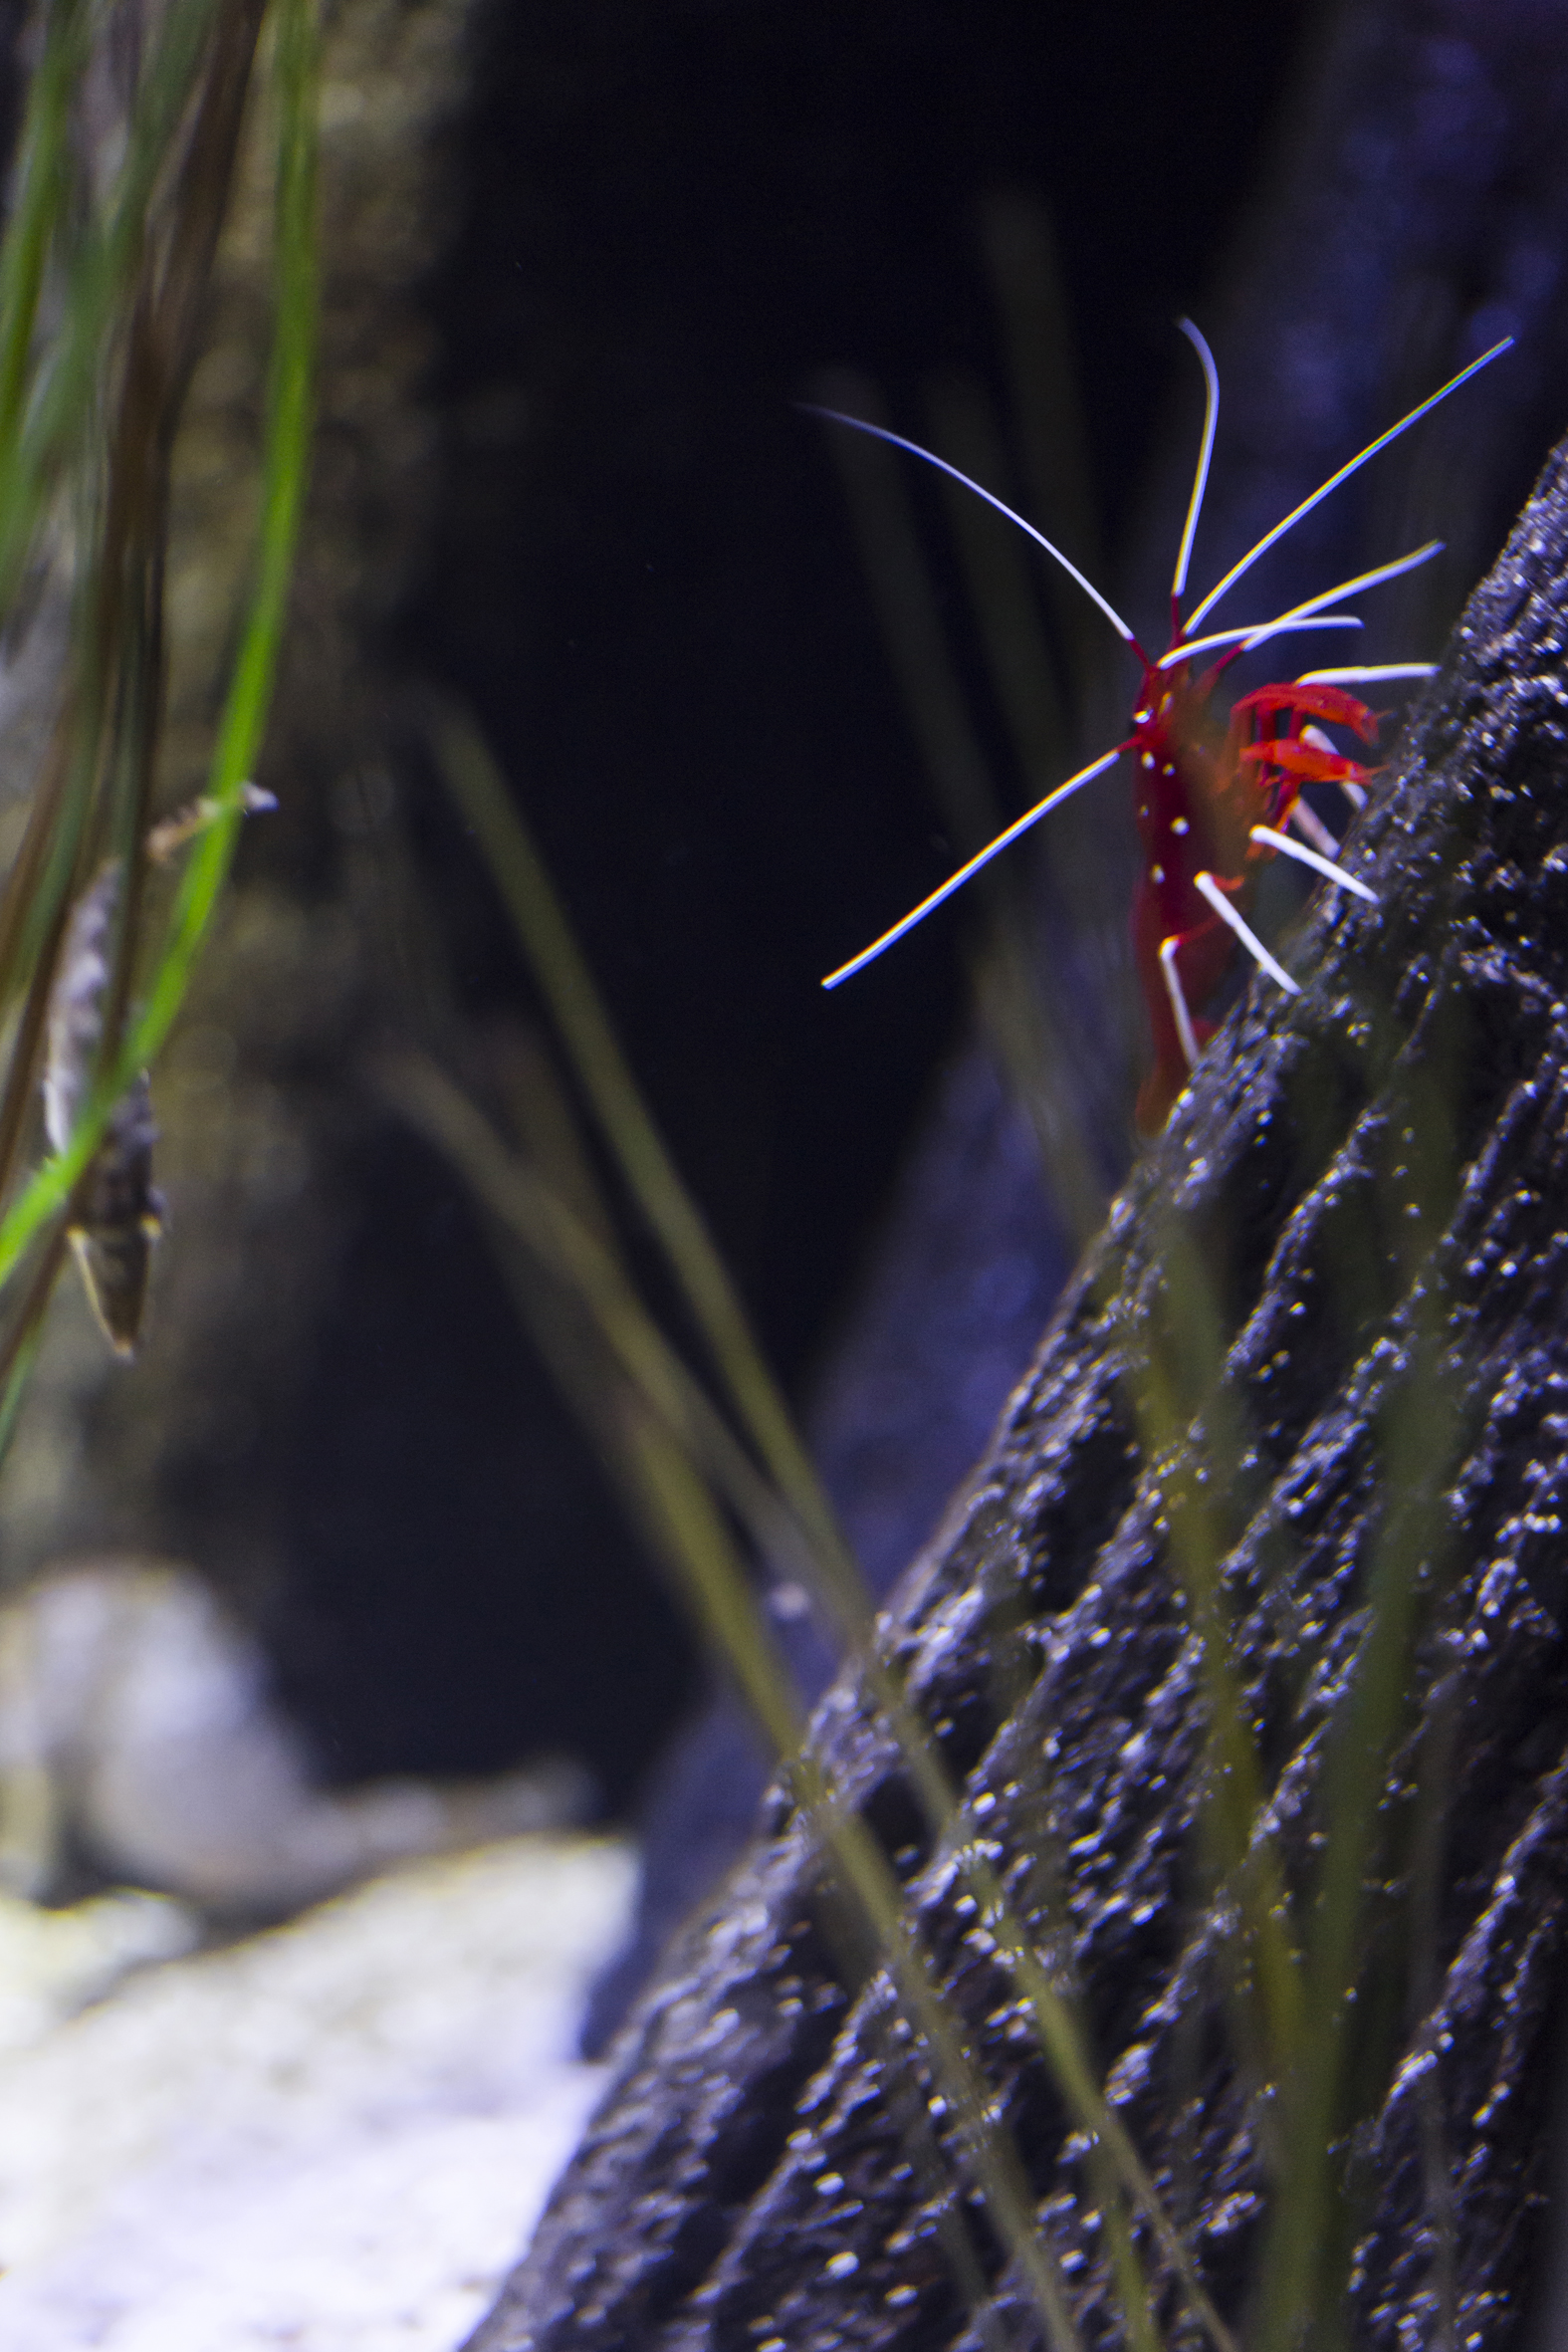 The cleaner shrimp swims through its tank at SEA LIFE Hanover.